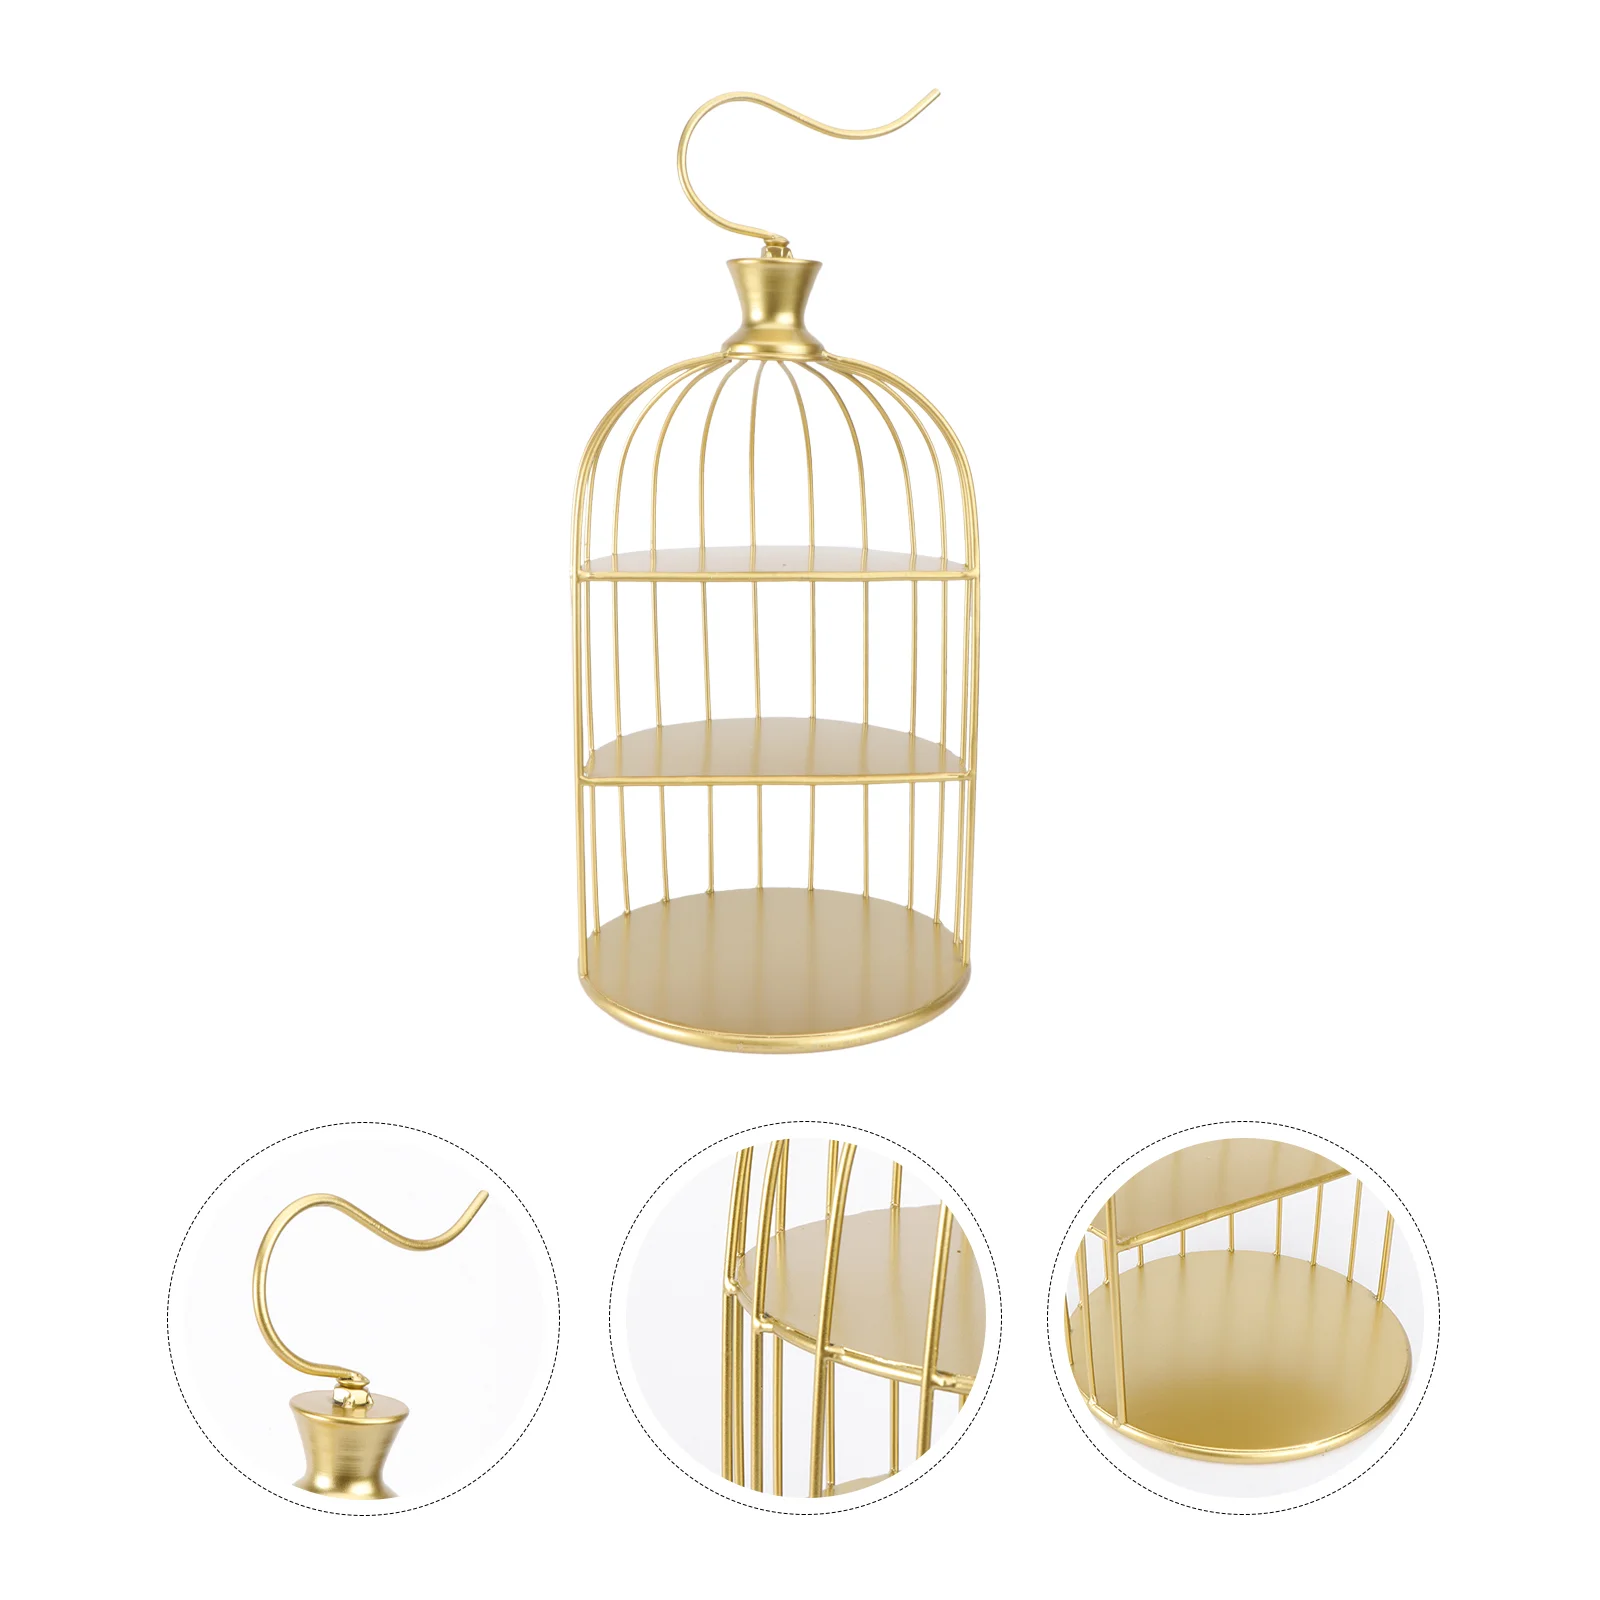 

Stand Cake Cupcake Display Dessert Tower Bird Cage Tray Wedding Tier Holder Serving 3 Jewelry Tiered Platter Vanity Table Metal